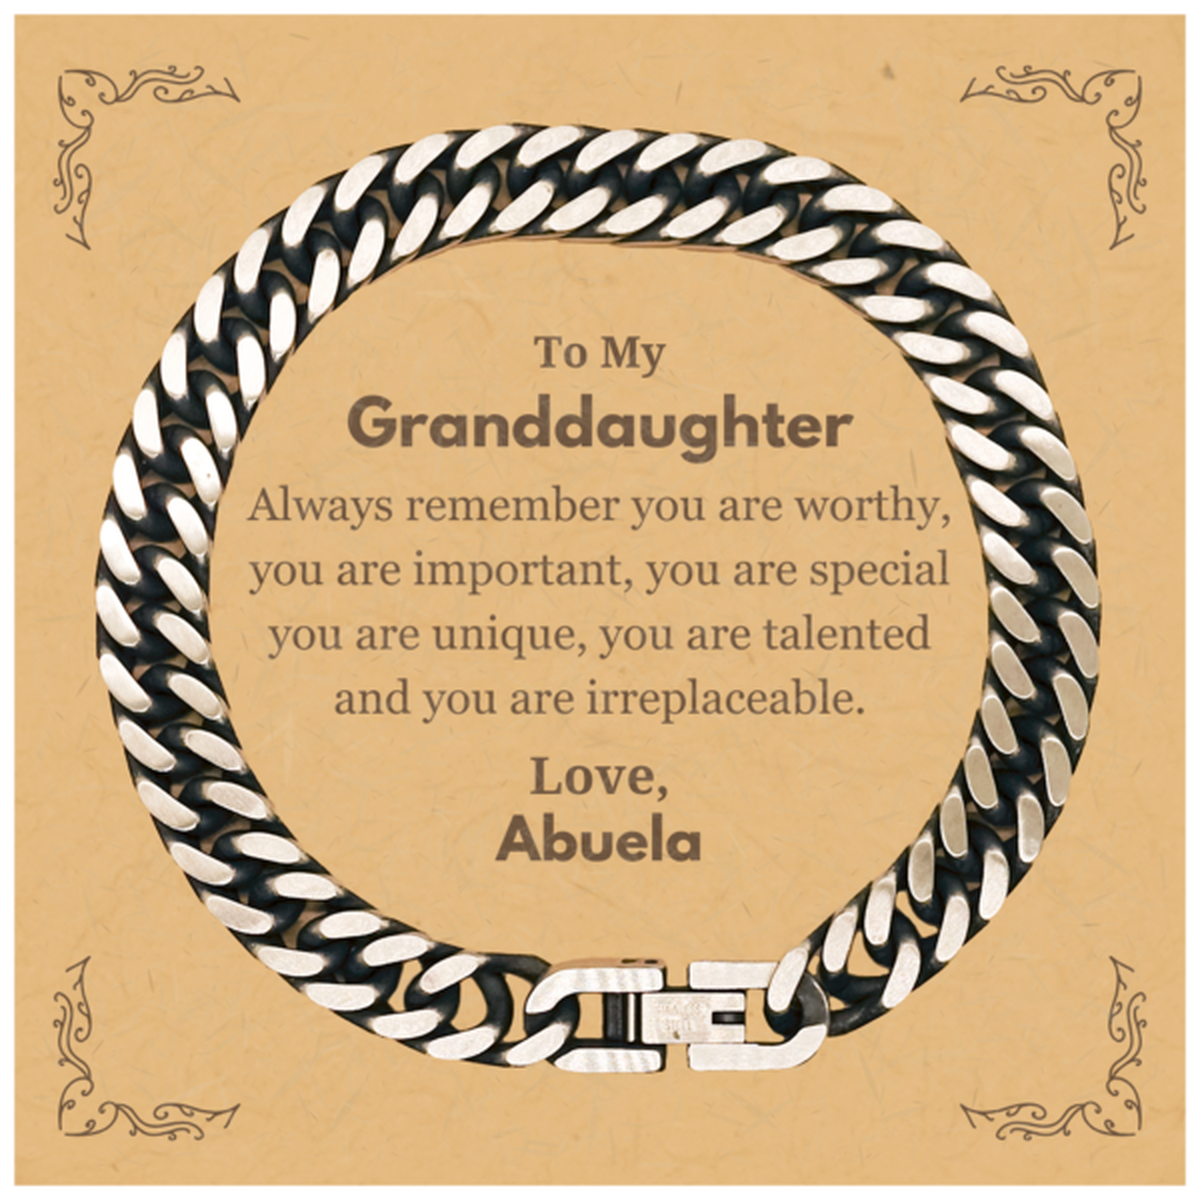 Granddaughter Birthday Gifts from Abuela, Inspirational Cuban Link Chain Bracelet for Granddaughter Christmas Graduation Gifts for Granddaughter Always remember you are worthy, you are important. Love, Abuela